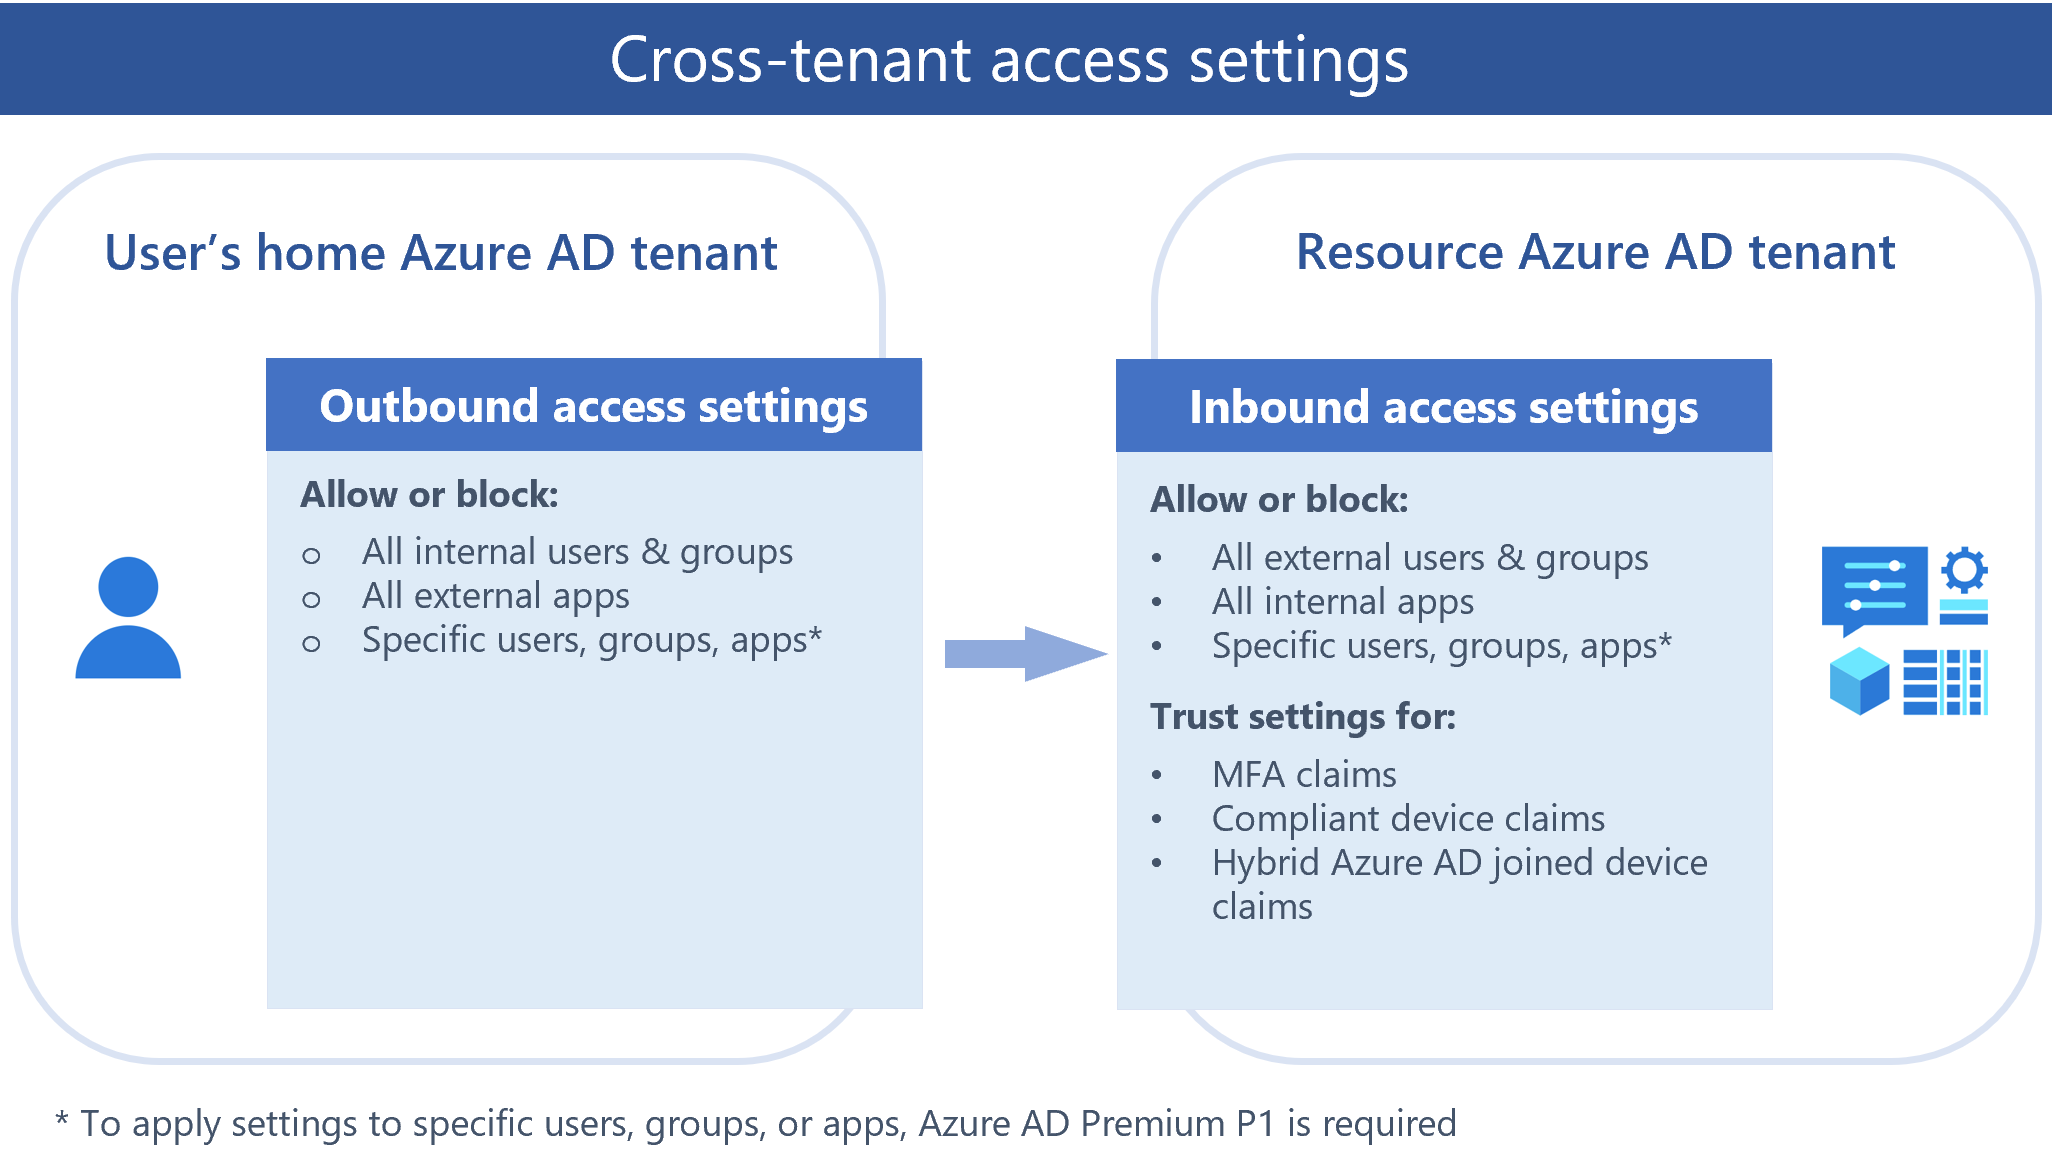 Overview diagram of cross-tenant access settings.